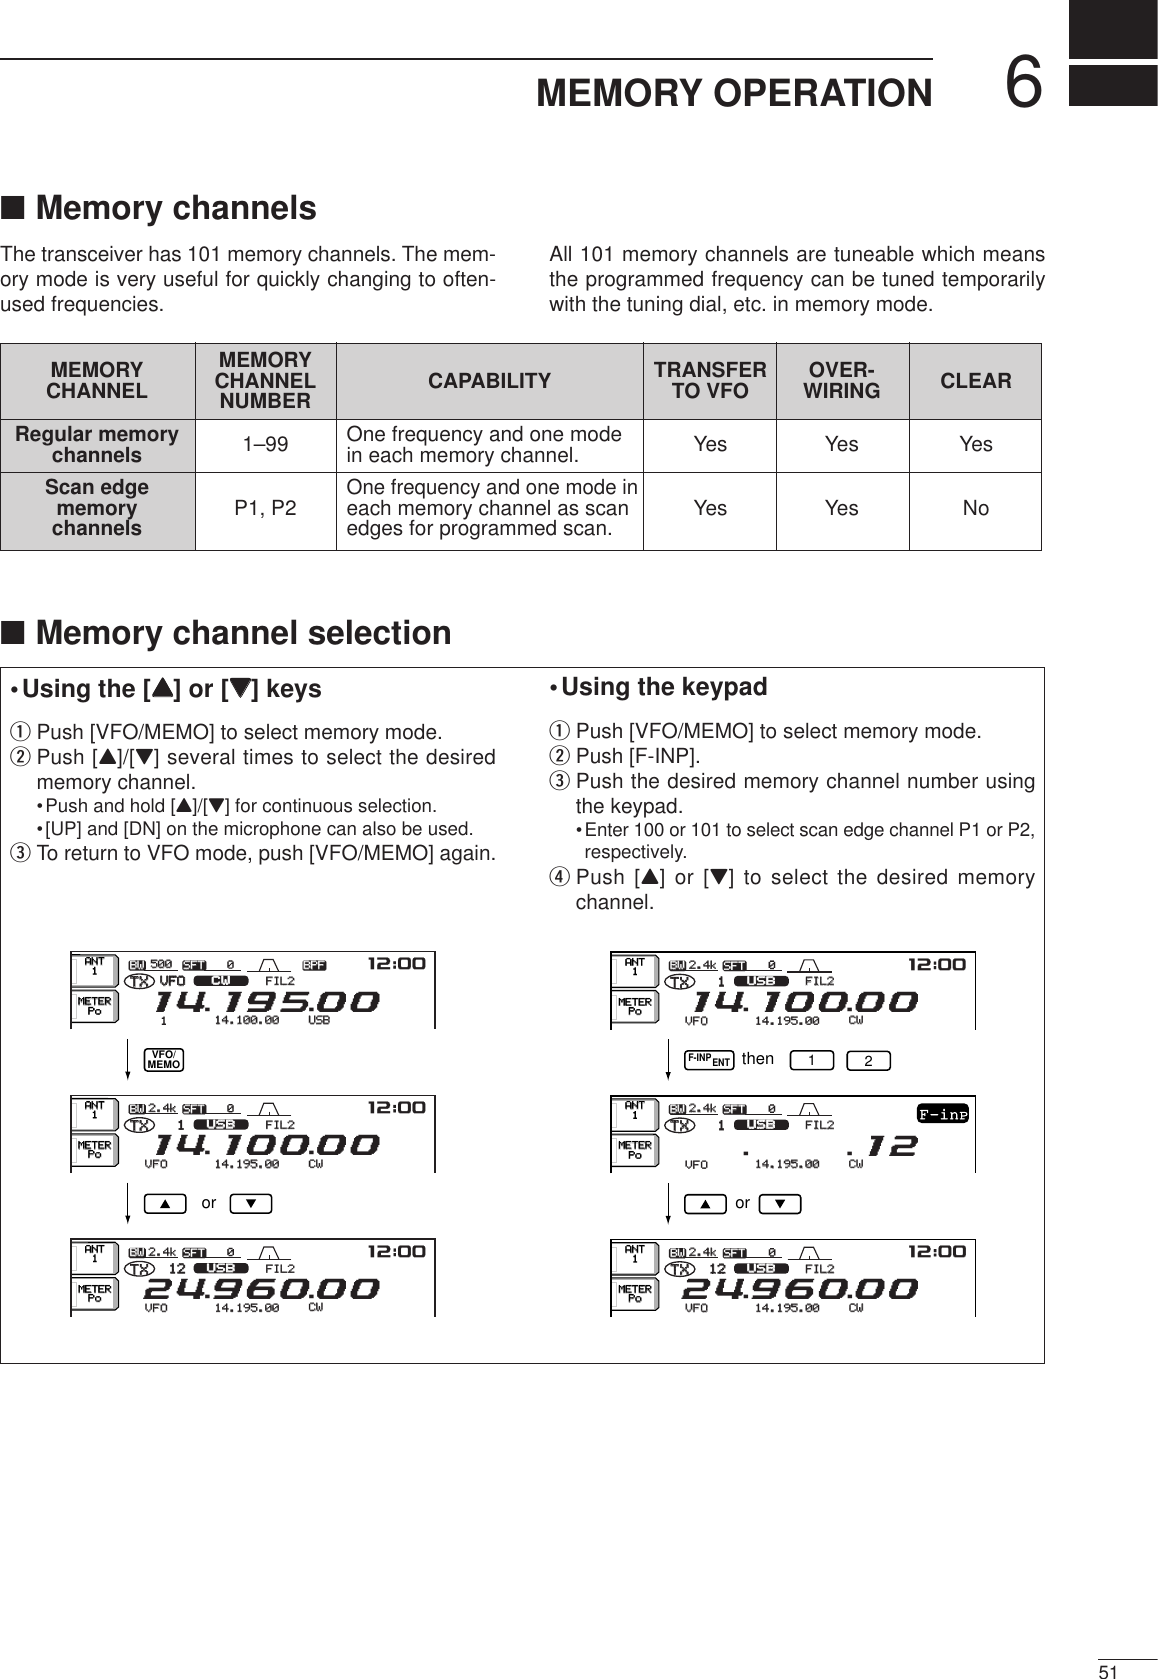 651MEMORY OPERATION■Memory channelsThe transceiver has 101 memory channels. The mem-ory mode is very useful for quickly changing to often-used frequencies.All 101 memory channels are tuneable which meansthe programmed frequency can be tuned temporarilywith the tuning dial, etc. in memory mode.■Memory channel selection•Using the [YY] or [ZZ] keysqPush [VFO/MEMO] to select memory mode.wPush [Y]/[Z] several times to select the desiredmemory channel.•Push and hold [Y]/[Z] for continuous selection.•[UP] and [DN] on the microphone can also be used.eTo return to VFO mode, push [VFO/MEMO] again.•Using the keypadqPush [VFO/MEMO] to select memory mode.wPush [F-INP].ePush the desired memory channel number usingthe keypad.•Enter 100 or 101 to select scan edge channel P1 or P2,respectively.rPush [Y] or [Z] to select the desired memorychannel.SFTSFT 0FIL2FIL2CWCWqw:ppTXTXUSBUSBqr.qot.pp14.100.0014.100.00BPFBPF1VFOVFOBWBW 500 500 SFTSFT 0FIL2FIL2USBUSBqw:ppTXTXCWCWqr.qpp.pp14.195.0014.195.00VFOVFO1BWBW 2.4k2.4kSFTSFT 0FIL2FIL2USBUSBqw:ppTXTXwr.oyp.pp1212BWBW 2.4k2.4kCWCW14.195.0014.195.00VFOVFOANTANT1METERMETERPoPoANTANT1METERMETERPoPoANTANT1METERMETERPoPoVFO/MEMOorF-INPENTSFTSFT 0FIL2FIL2USBUSBqw:ppTXTXCWCWqr.qpp.pp14.195.0014.195.00VFOVFO1BWBW 2.4k2.4kSFTSFT 0FIL2FIL2USBUSBTXTXCWCW.qpp.qw14.195.0014.195.00VFOVFO1BWBW 2.4k2.4kSFTSFT 0FIL2FIL2USBUSBqw:ppTXTXwr.oyp.pp1212BWBW 2.4k2.4kCWCW14.195.0014.195.00VFOVFOF-inPANTANT1METERMETERPoPoANTANT1METERMETERPoPoANTANT1METERMETERPoPo12orthenMEMORY MEMORY TRANSFER OVER-CHANNEL CHANNEL CAPABILITY TO VFO WIRING CLEARNUMBERRegular memory 1–99 One frequency and one mode  Yes Yes Yeschannels in each memory channel.Scan edgeOne frequency and one mode inmemory P1, P2 each memory channel as scan Yes Yes Nochannels edges for programmed scan.